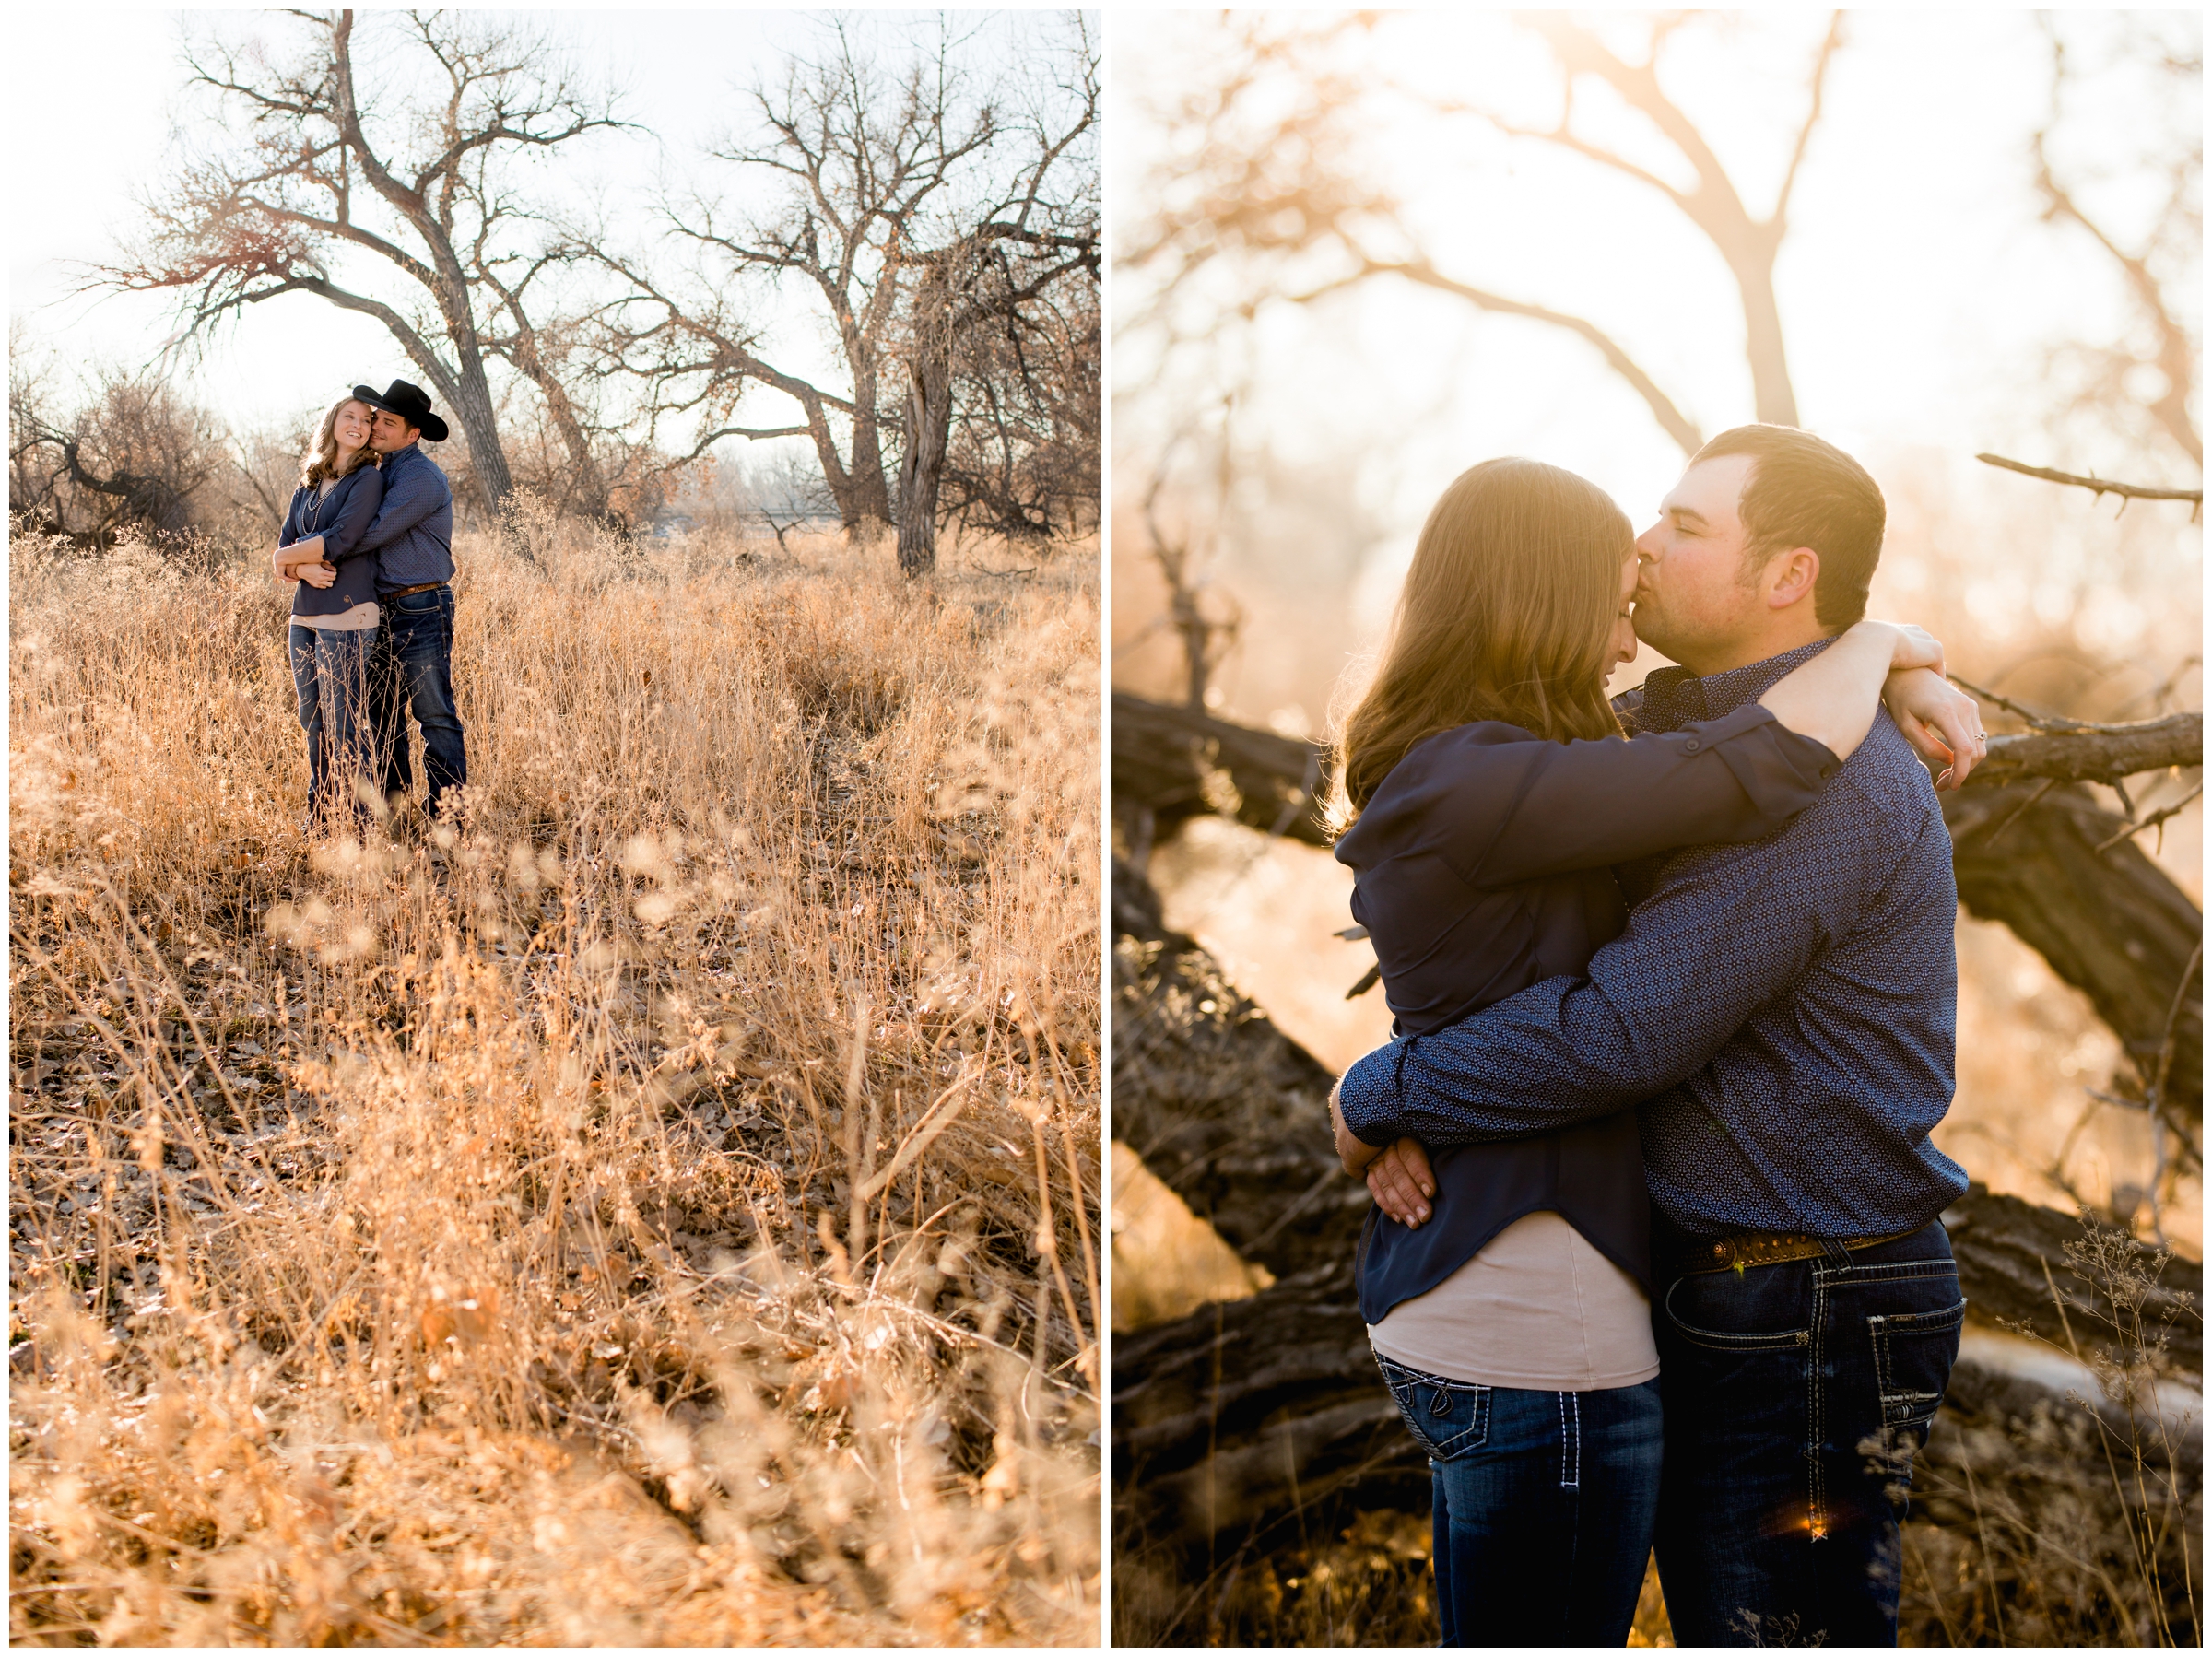 Rustic Colorado engagement photos in Kersey, CO by wedding and portrait photographer Plum Pretty Photography